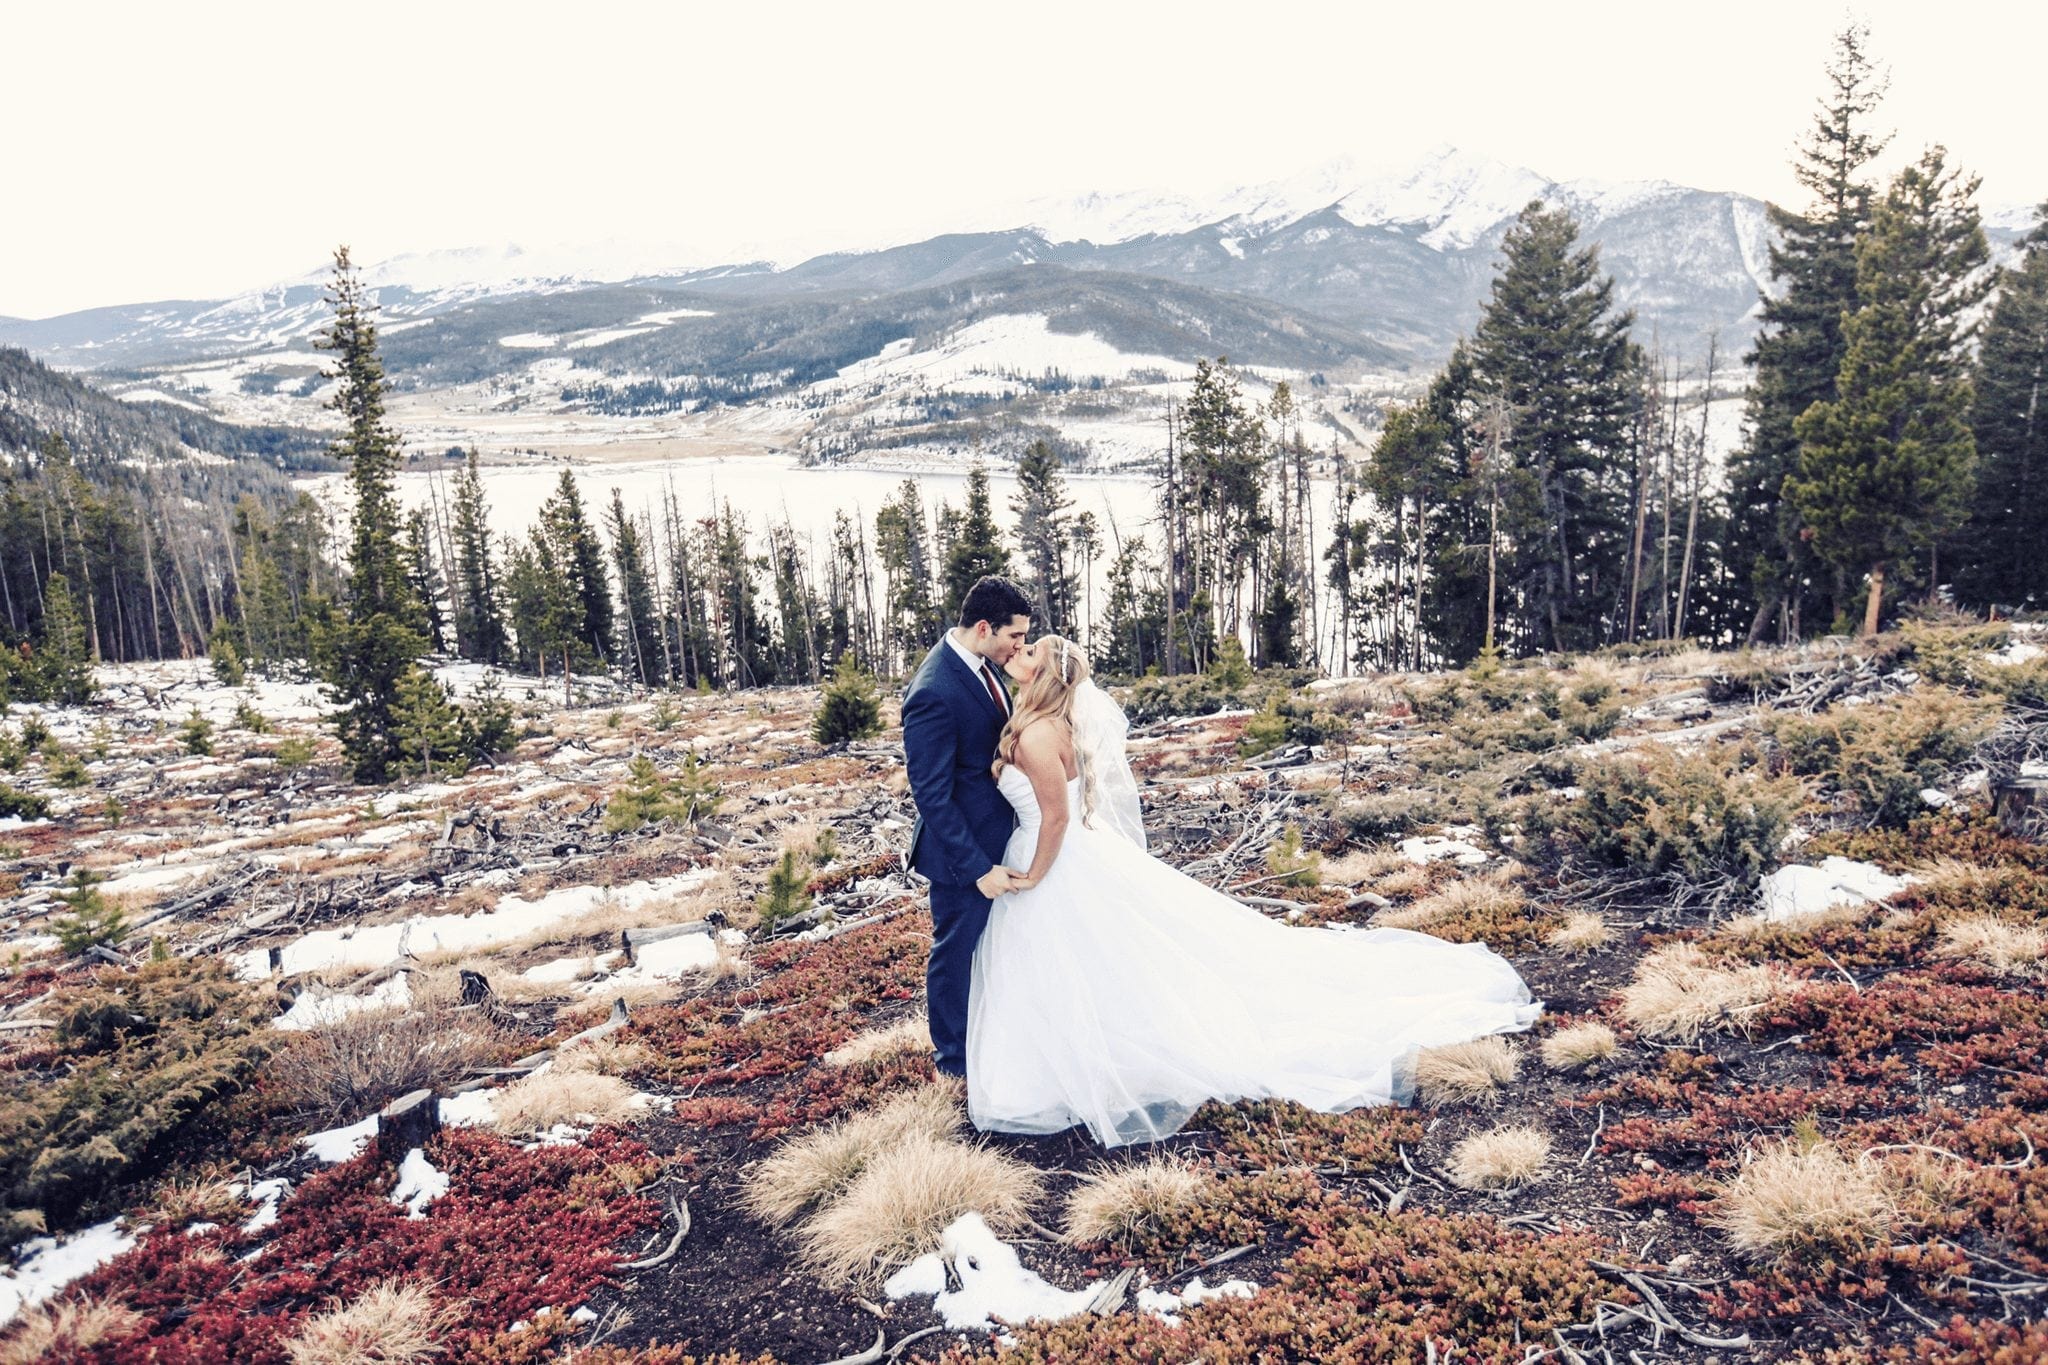 Bride and Groom kissing on the mountainside during their wedding in Breckenridge.